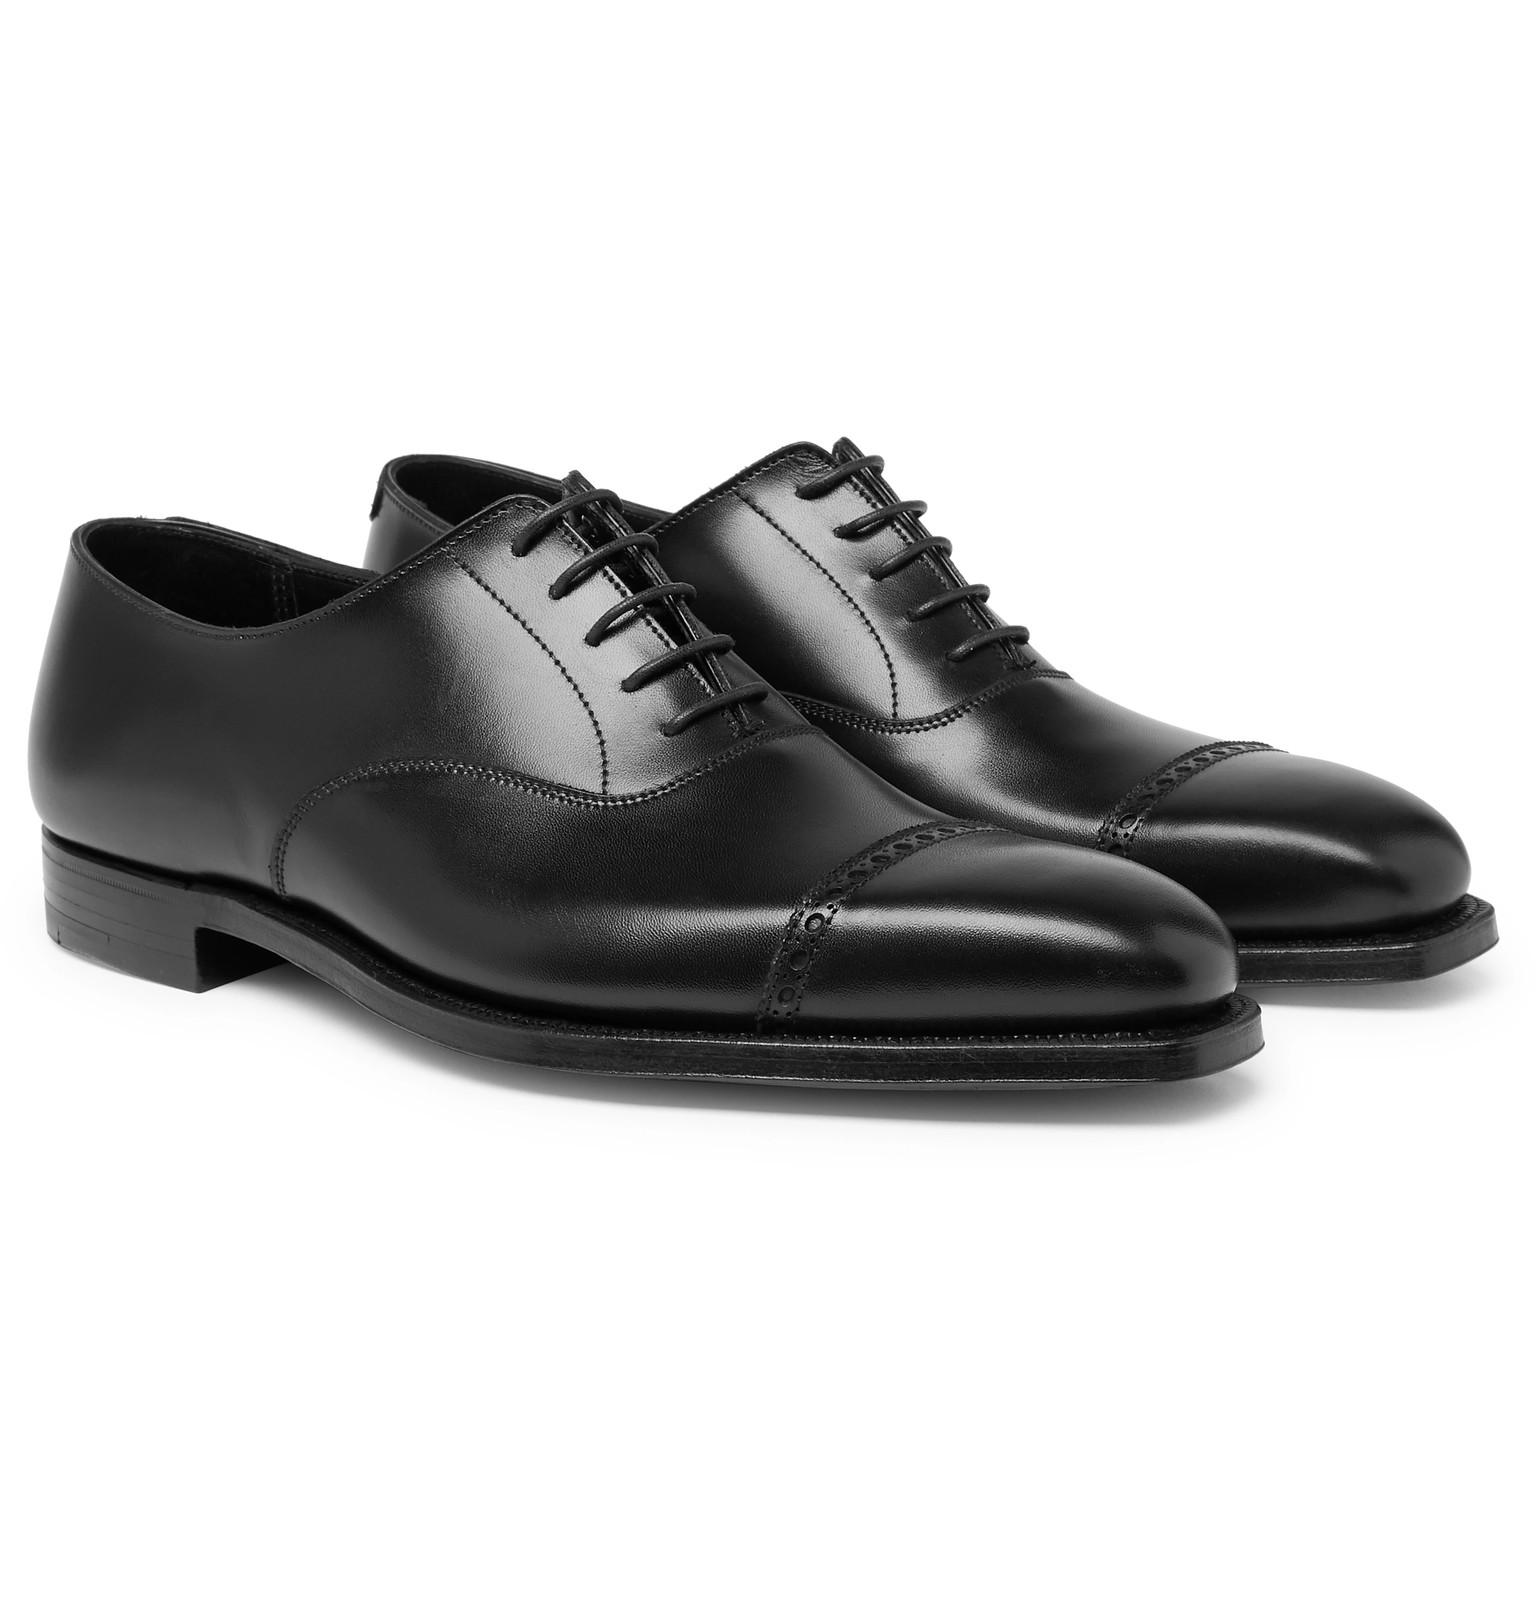 George Cleverley Charles Cap-toe Leather Oxford Shoes in Black for Men ...